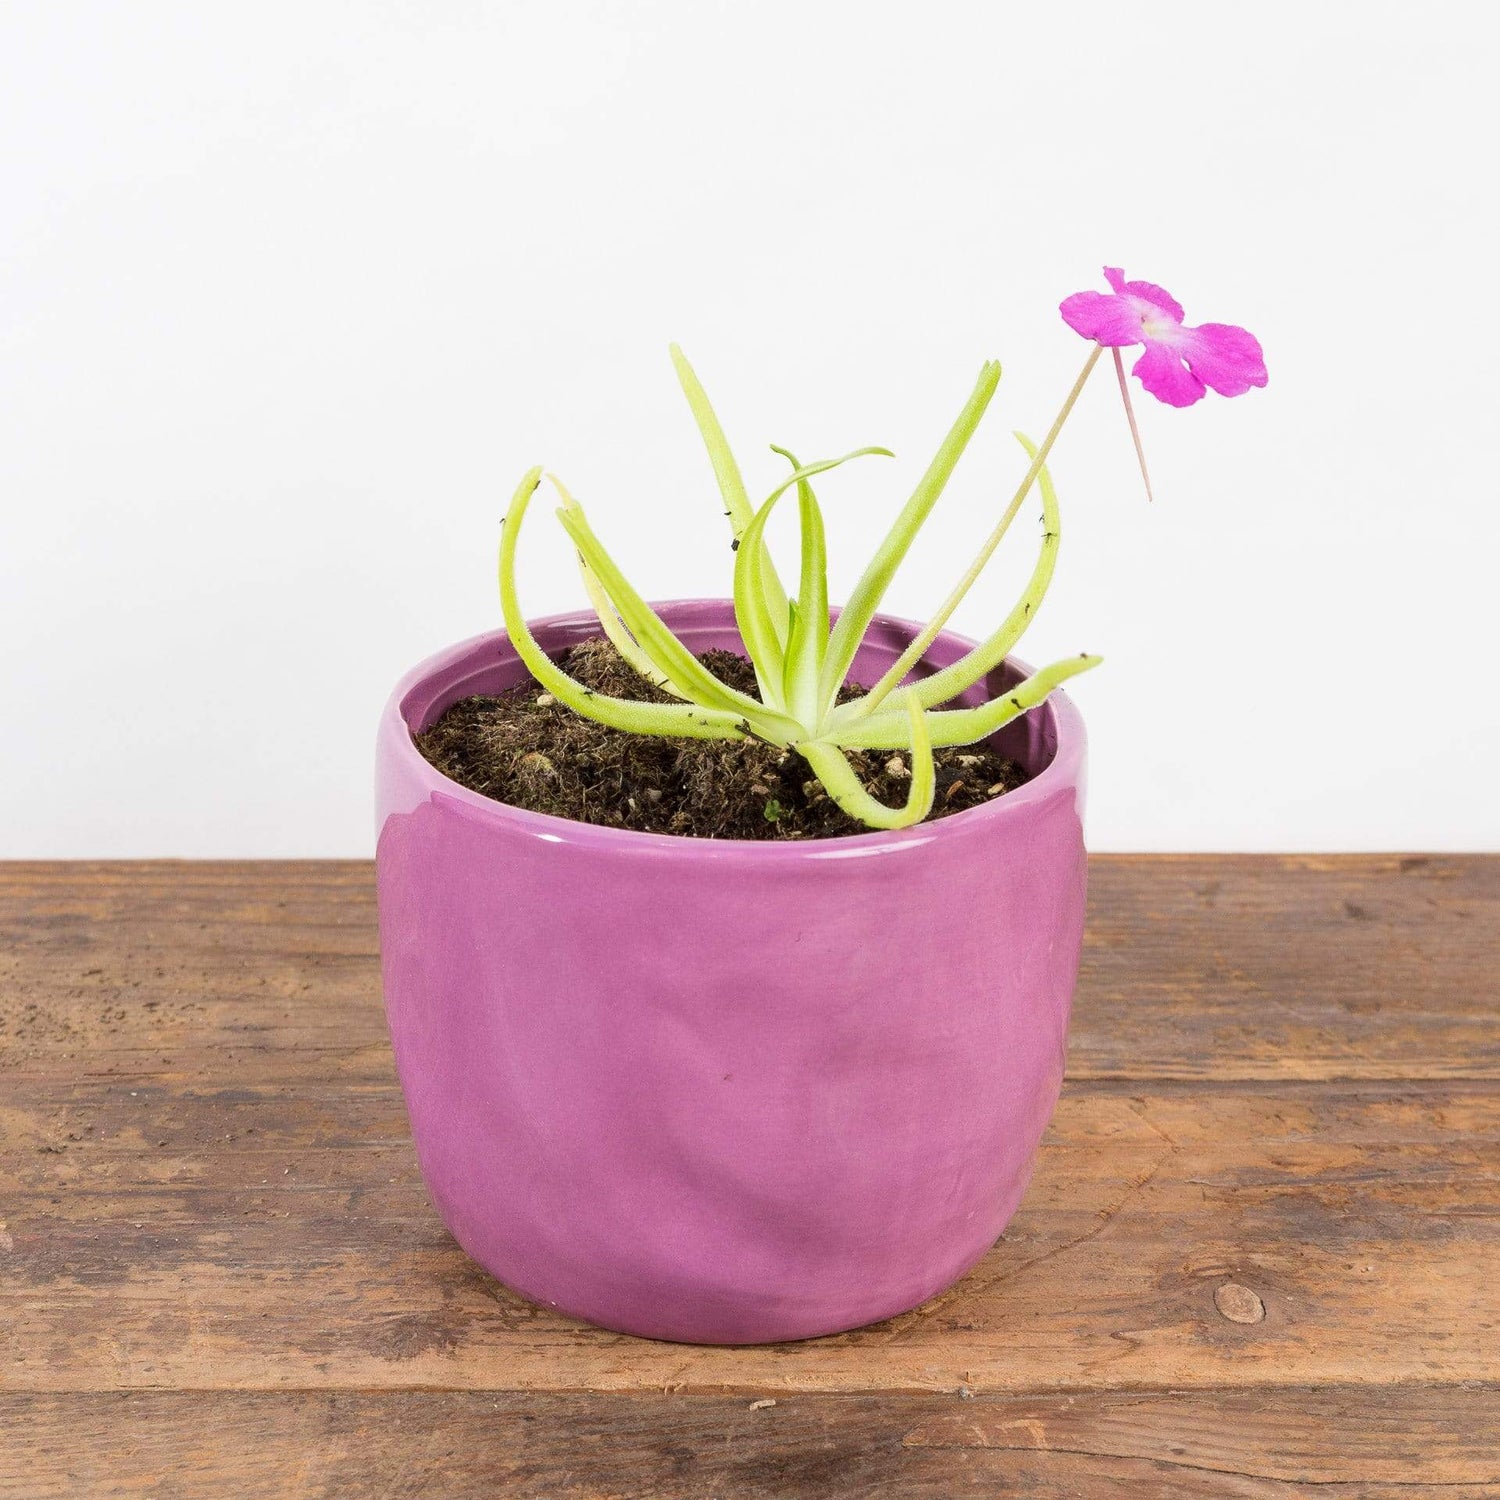 Carnivorous 'Octopus Plant' - Urban Sprouts